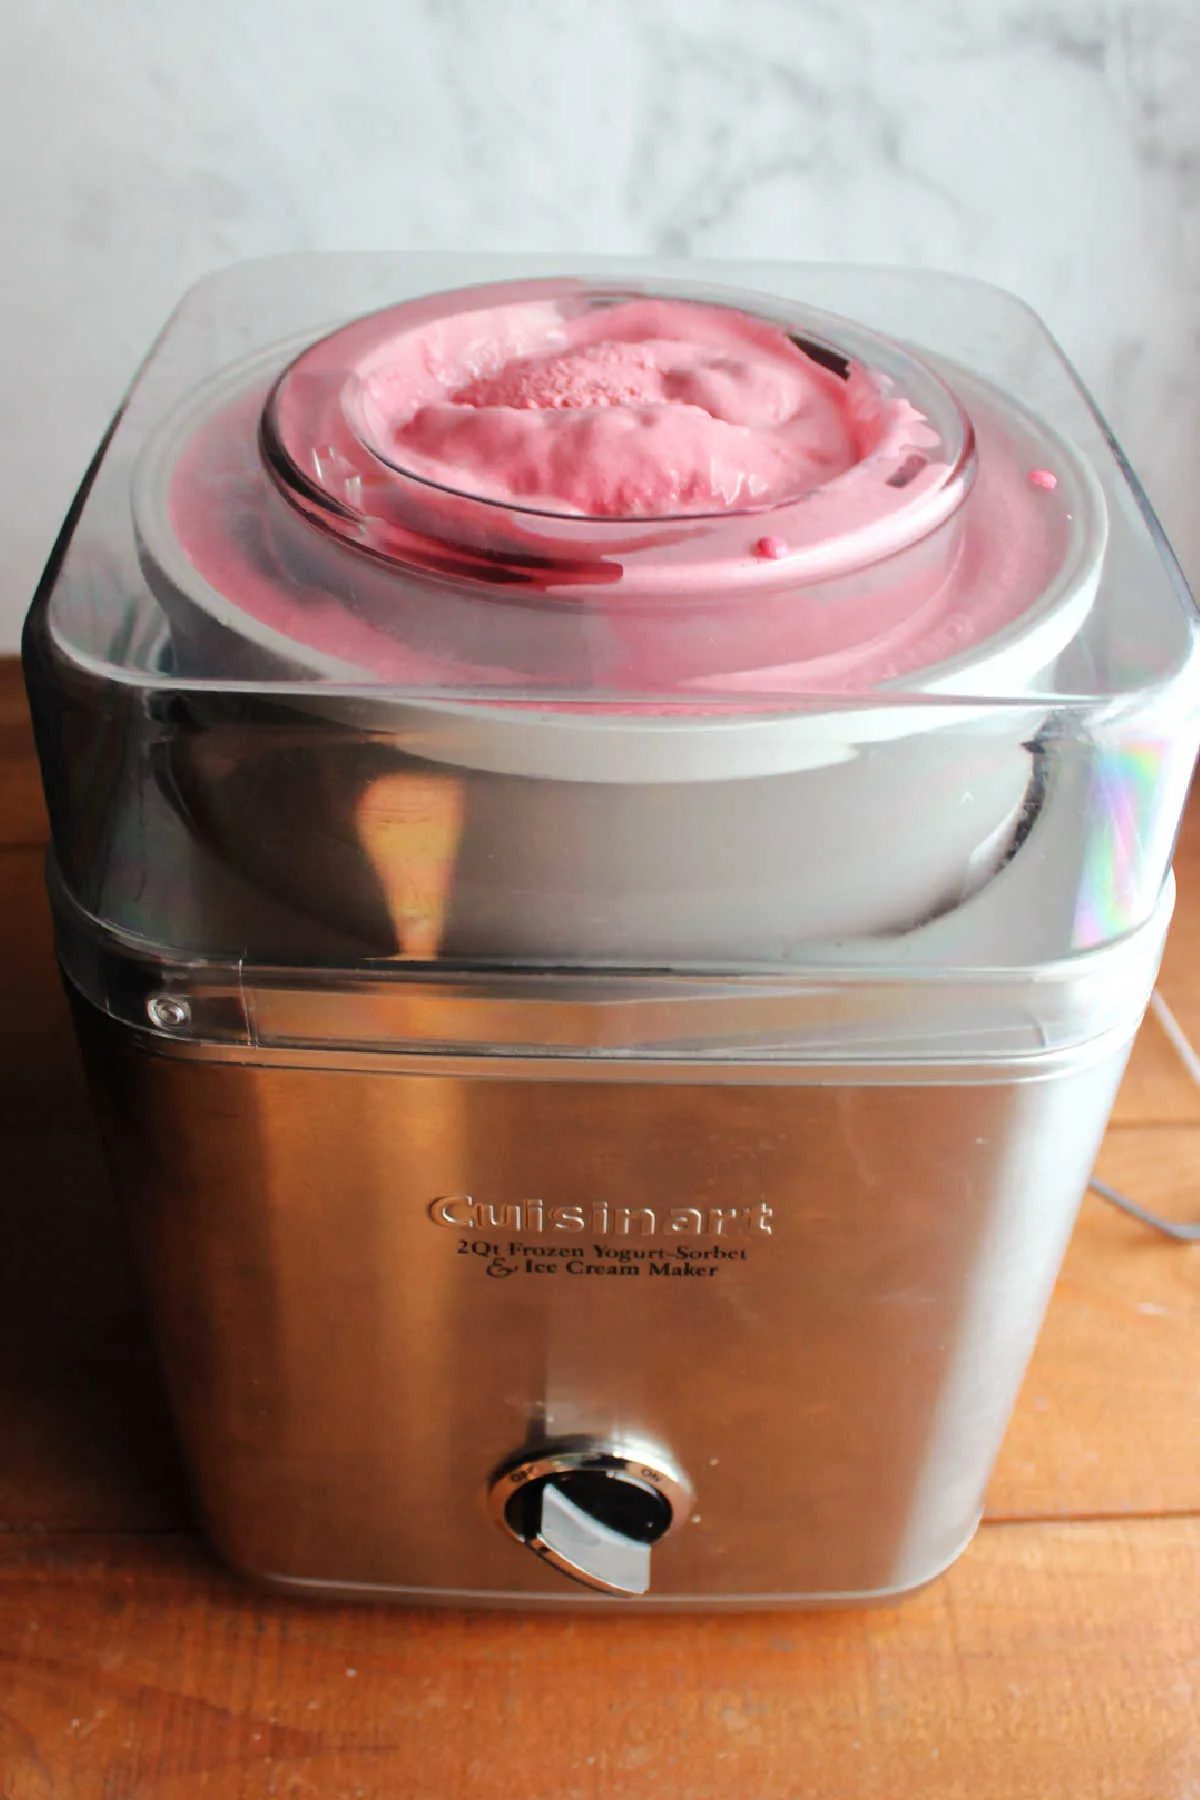 Ice cream maker filled with pinkish purple blackberry ice cream, ready to be transferred to storage containers and frozen.